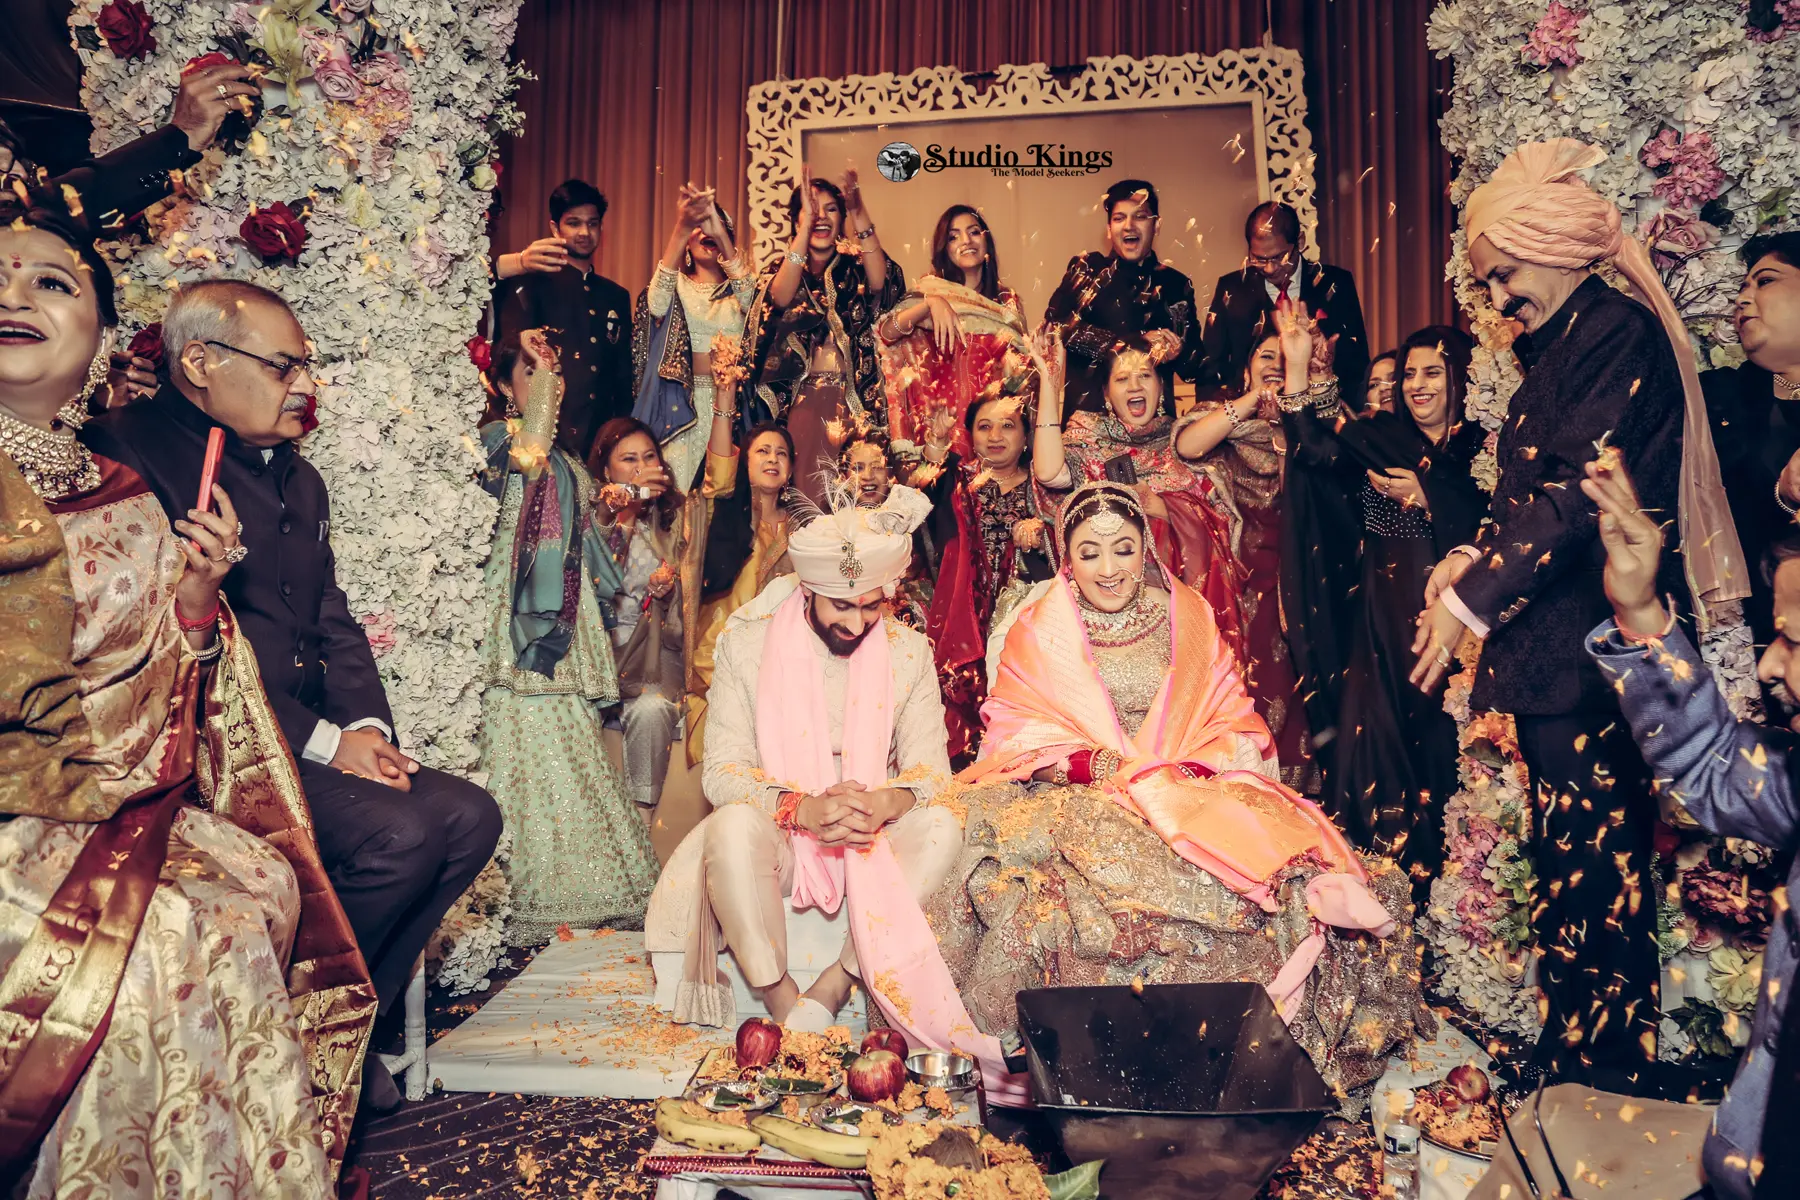 Discover the sacredness of wedding mantras, invoking blessings for the couple. Studio Kings Best Wedding Photographer in Chandigarh captures the spiritual significance of these chants.